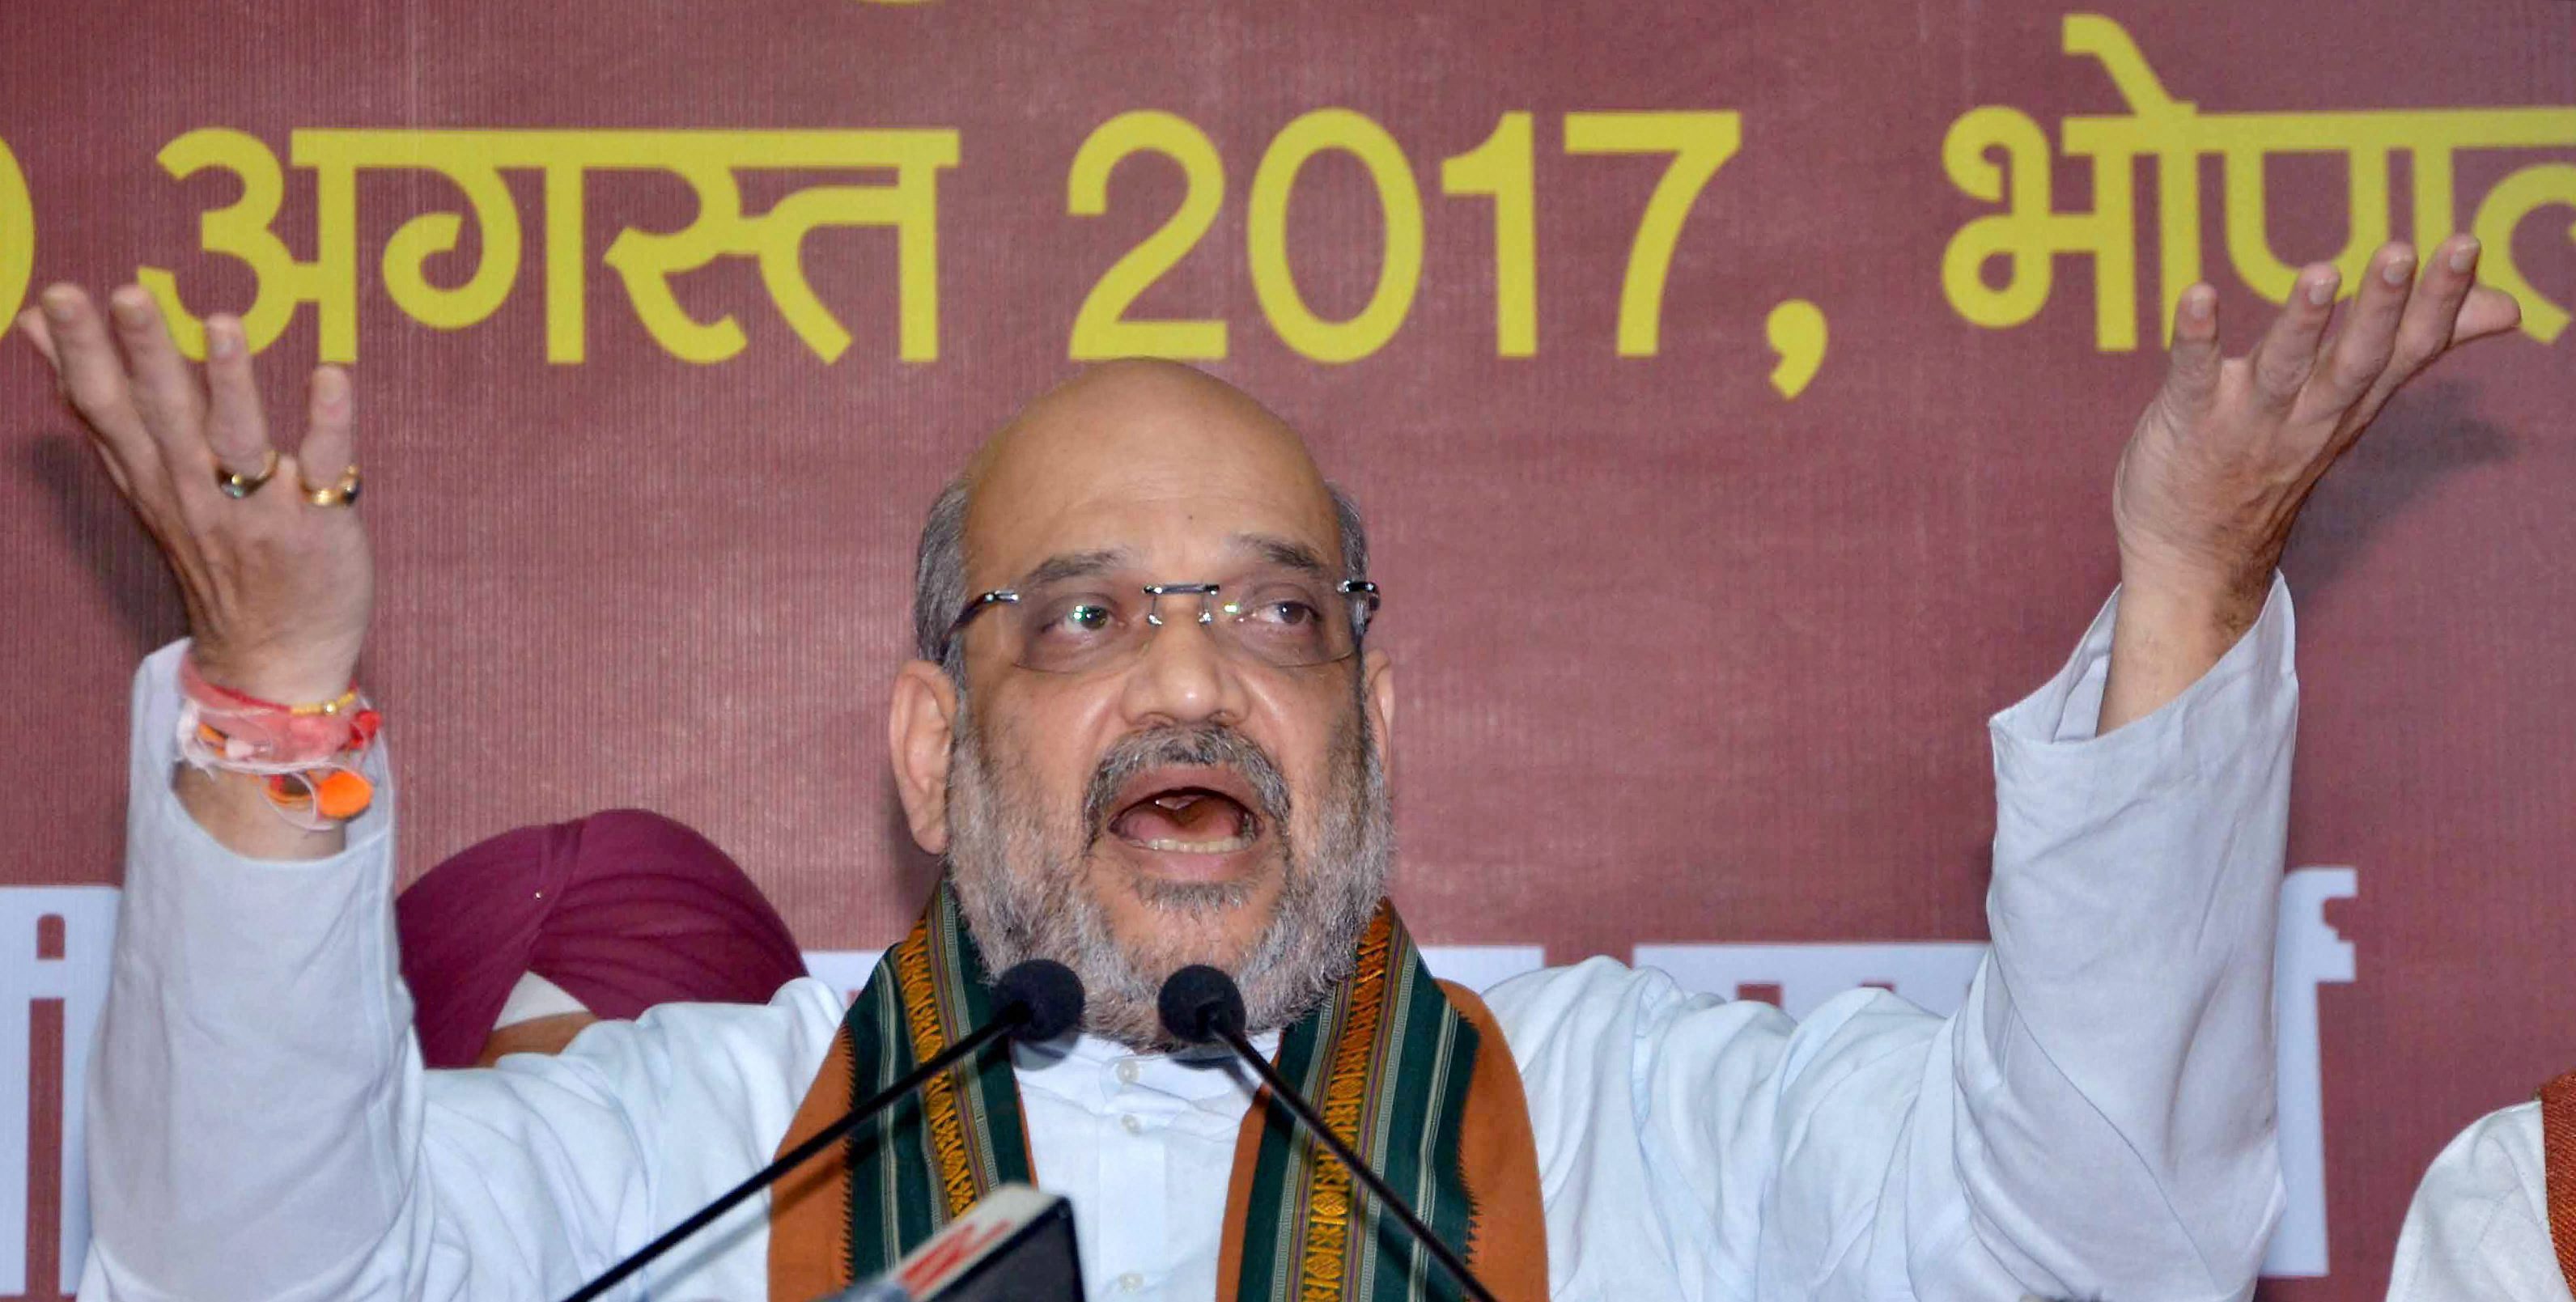 BJP has not set 75-year age bar for contesting polls: Shah